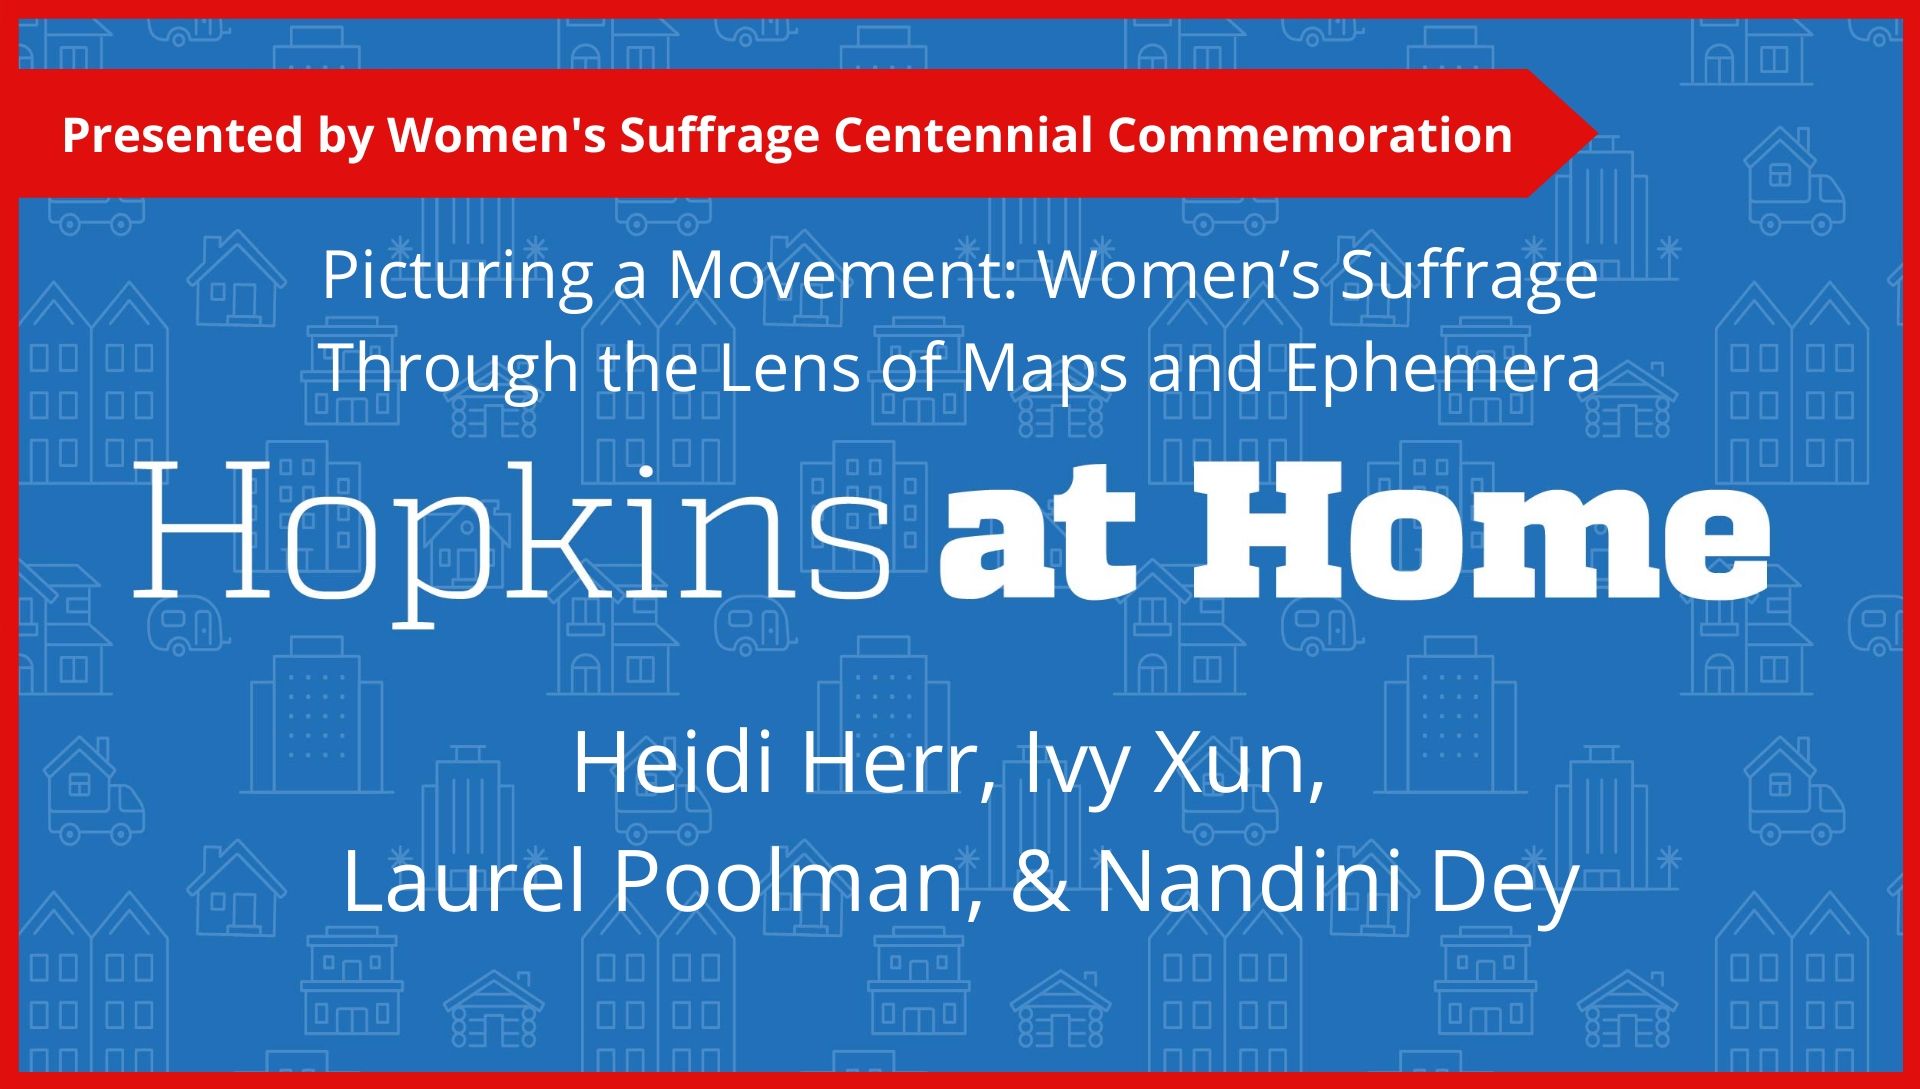 Picturing a Movement: Women’s Suffrage Through the Lens of Maps and Ephemera